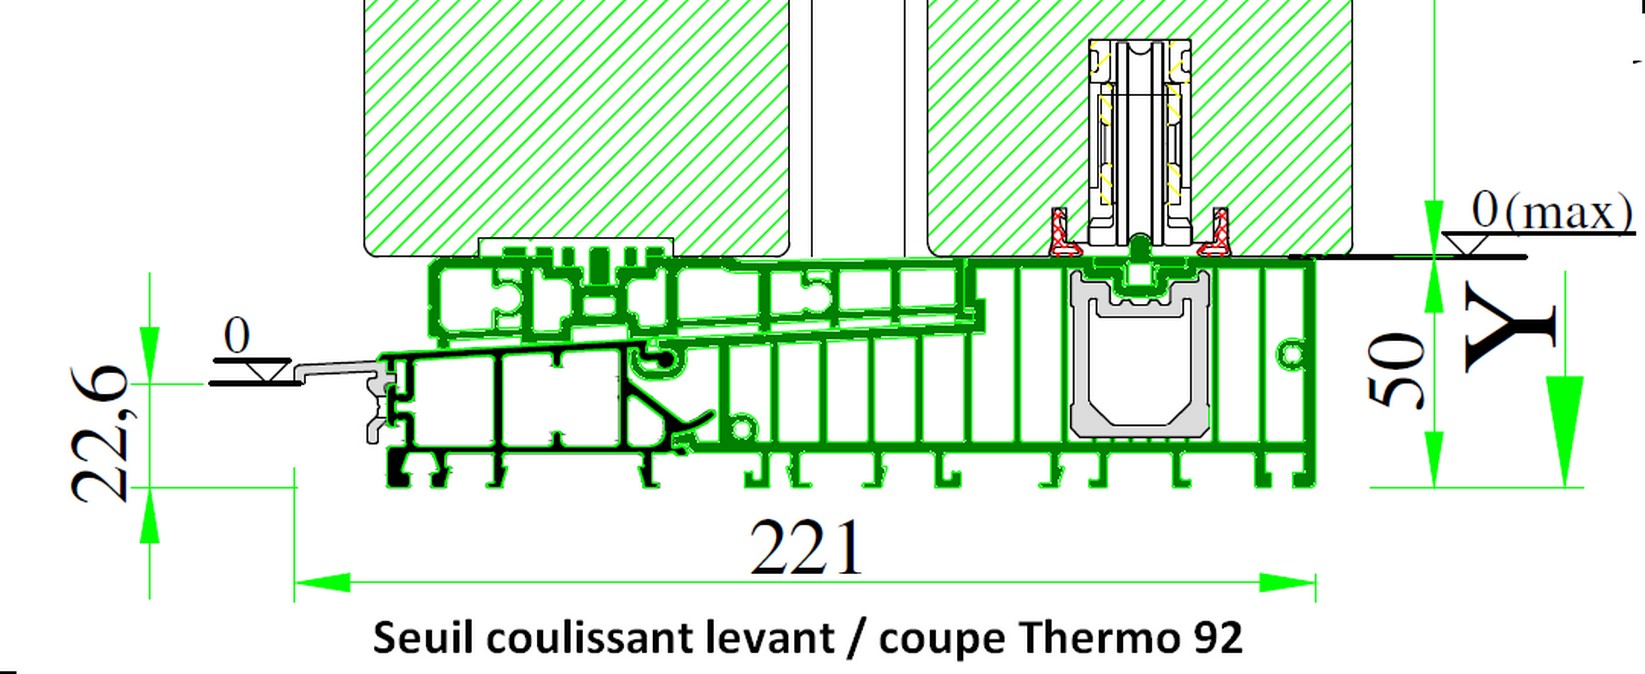 seuil coulissant levant thermo 92